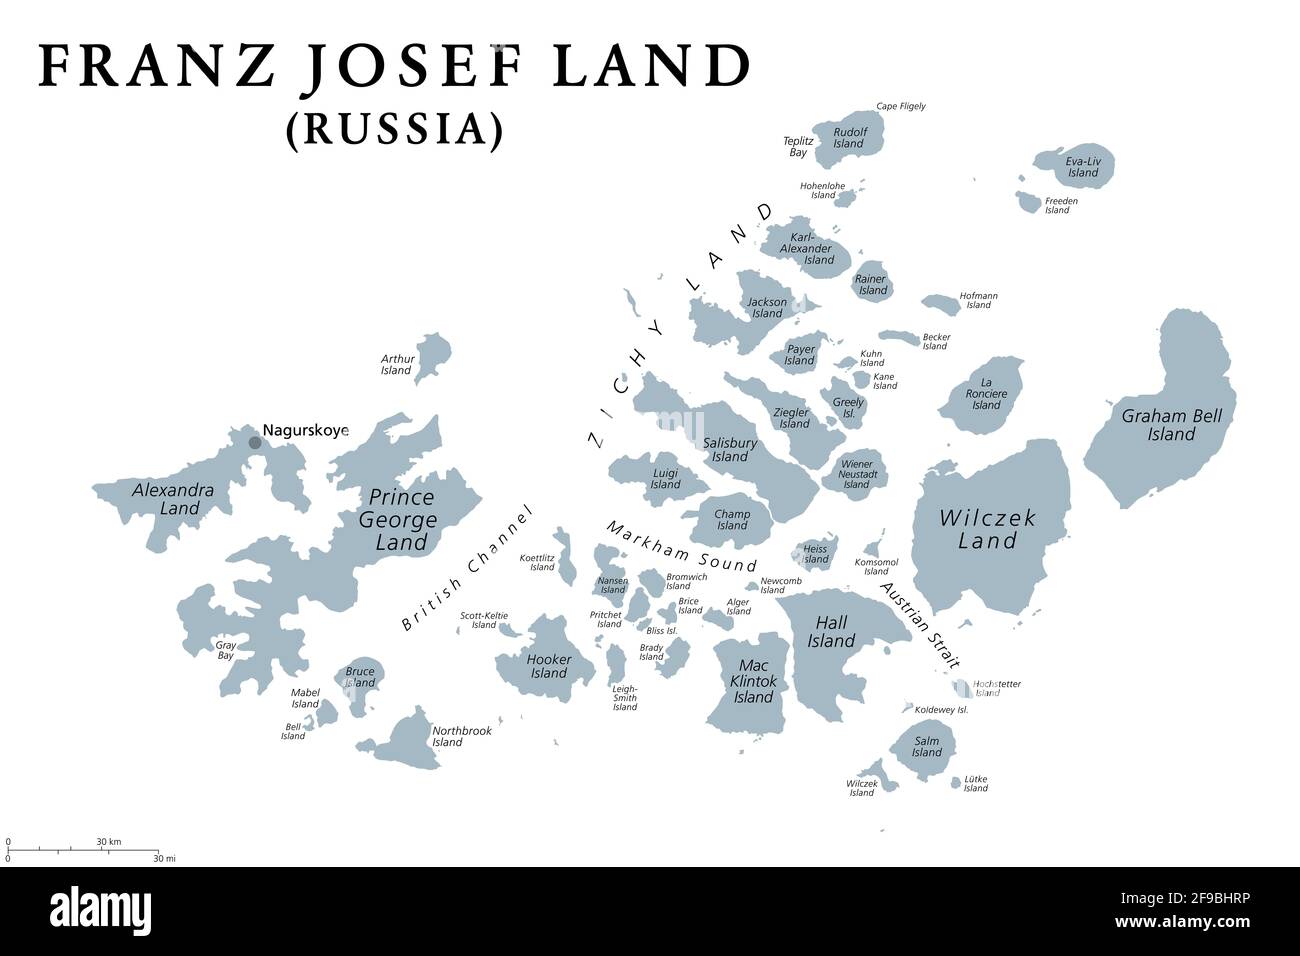 Franz Josef Land, gray political map. Russian archipelago in the Arctic Ocean, northernmost part of Arkhangelsk Oblast. Stock Photo